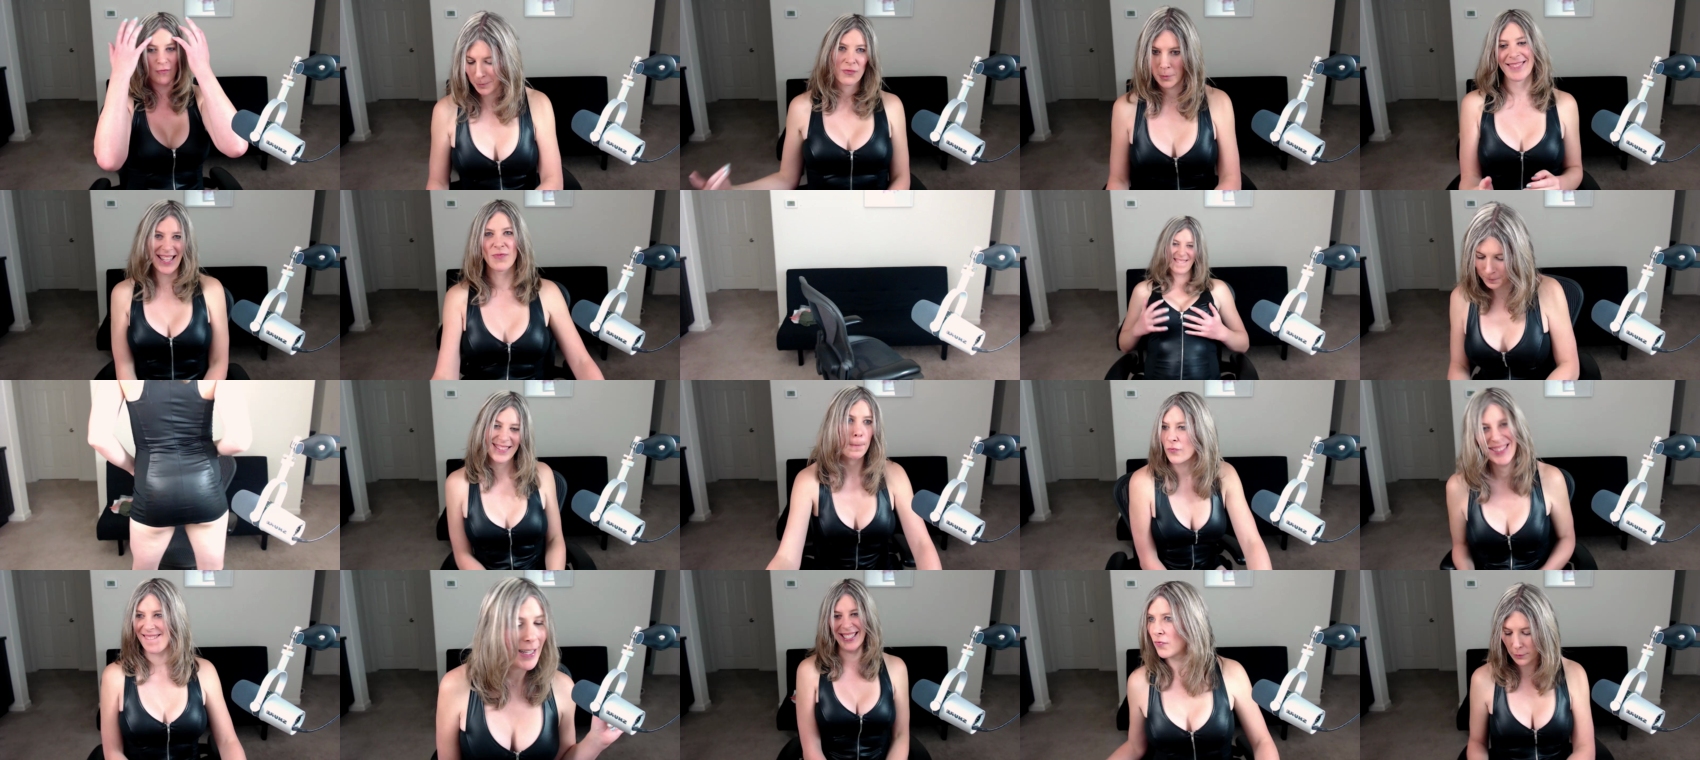 blondecalibabe Topless CAM SHOW @ Chaturbate 31-12-2021